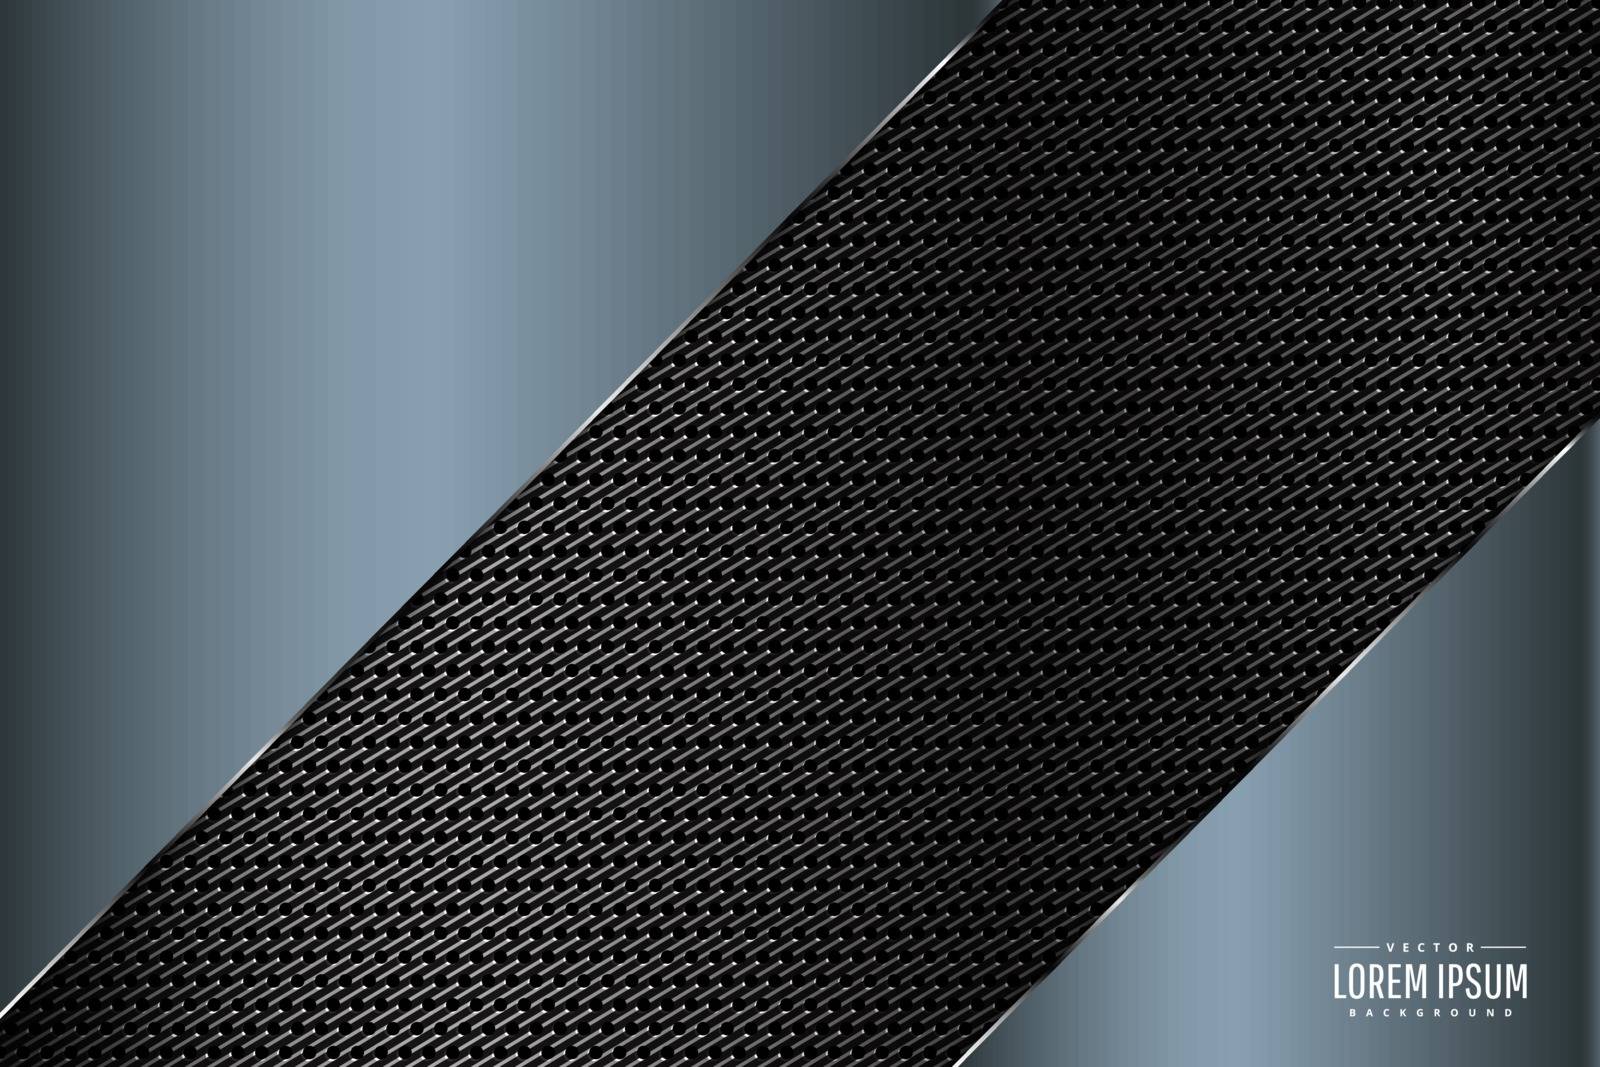 Metallic background.Blue and silver with carbon fiber texture.Metal technology concept.